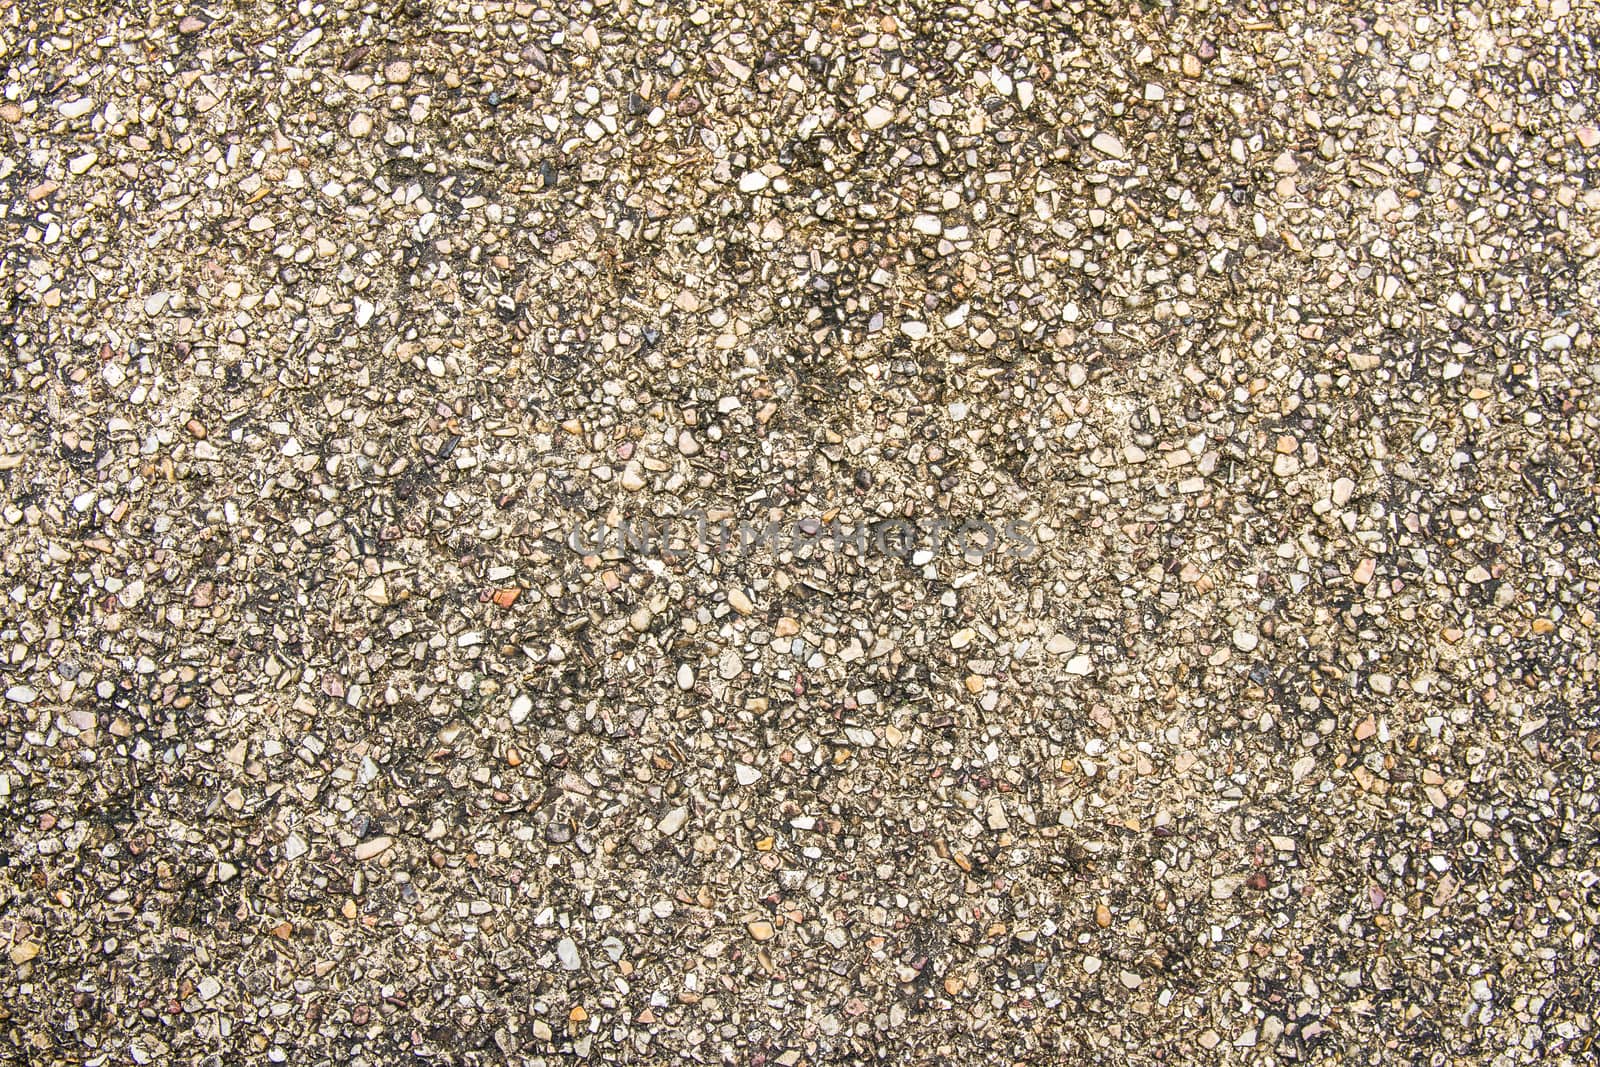 pebble stone floor texture background by kasinv